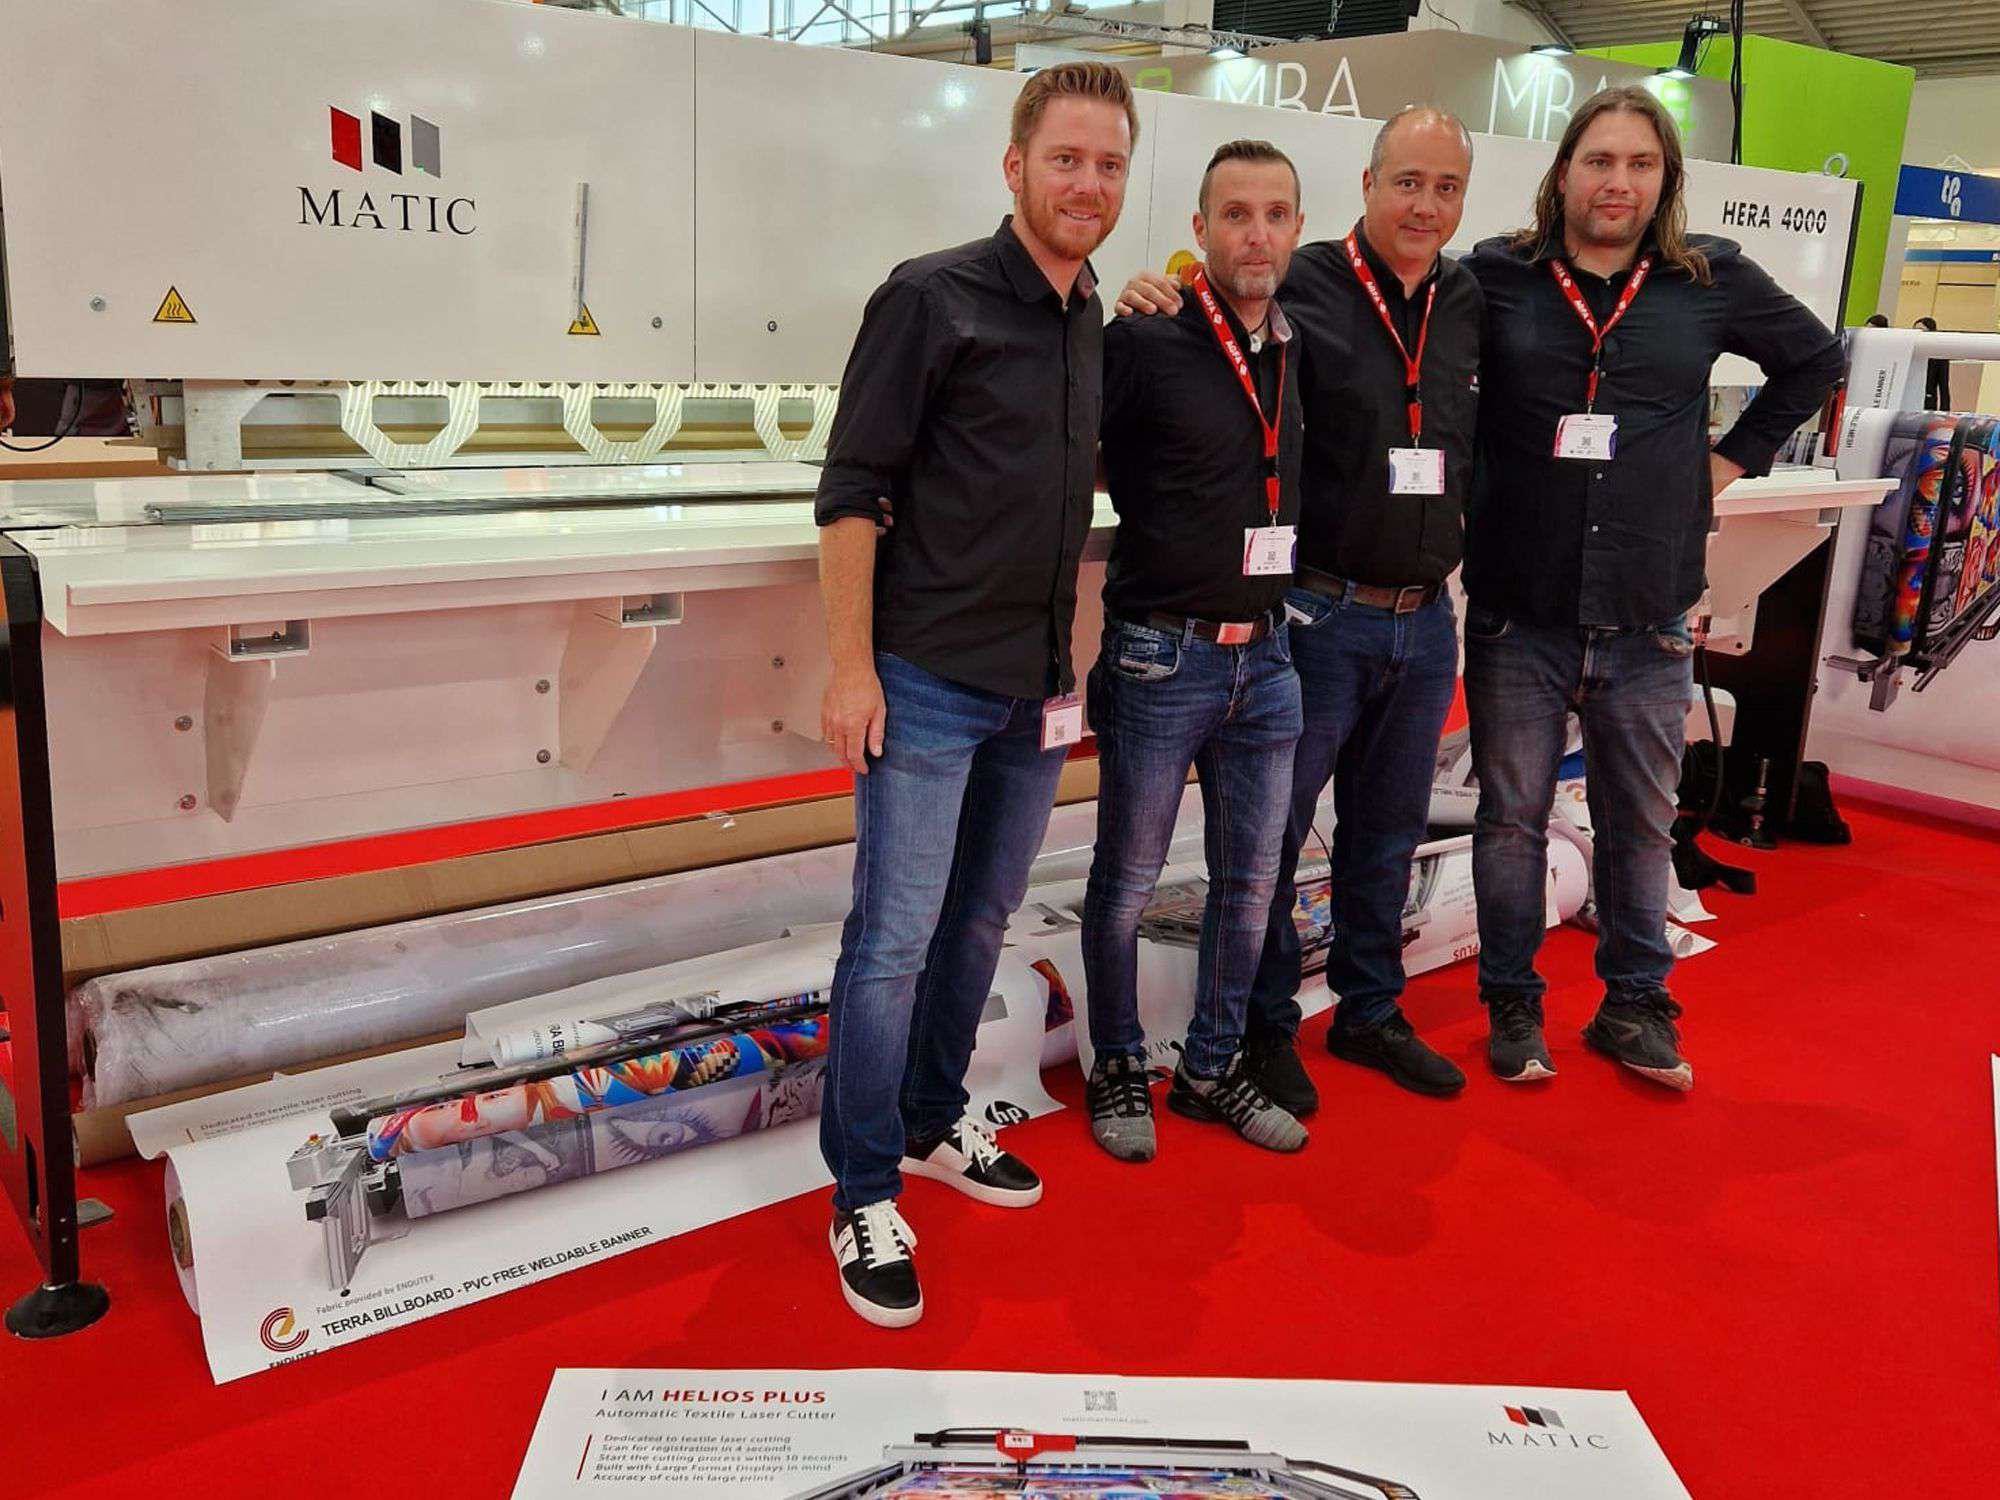 Thank you for visiting MATIC at FESPA 23!